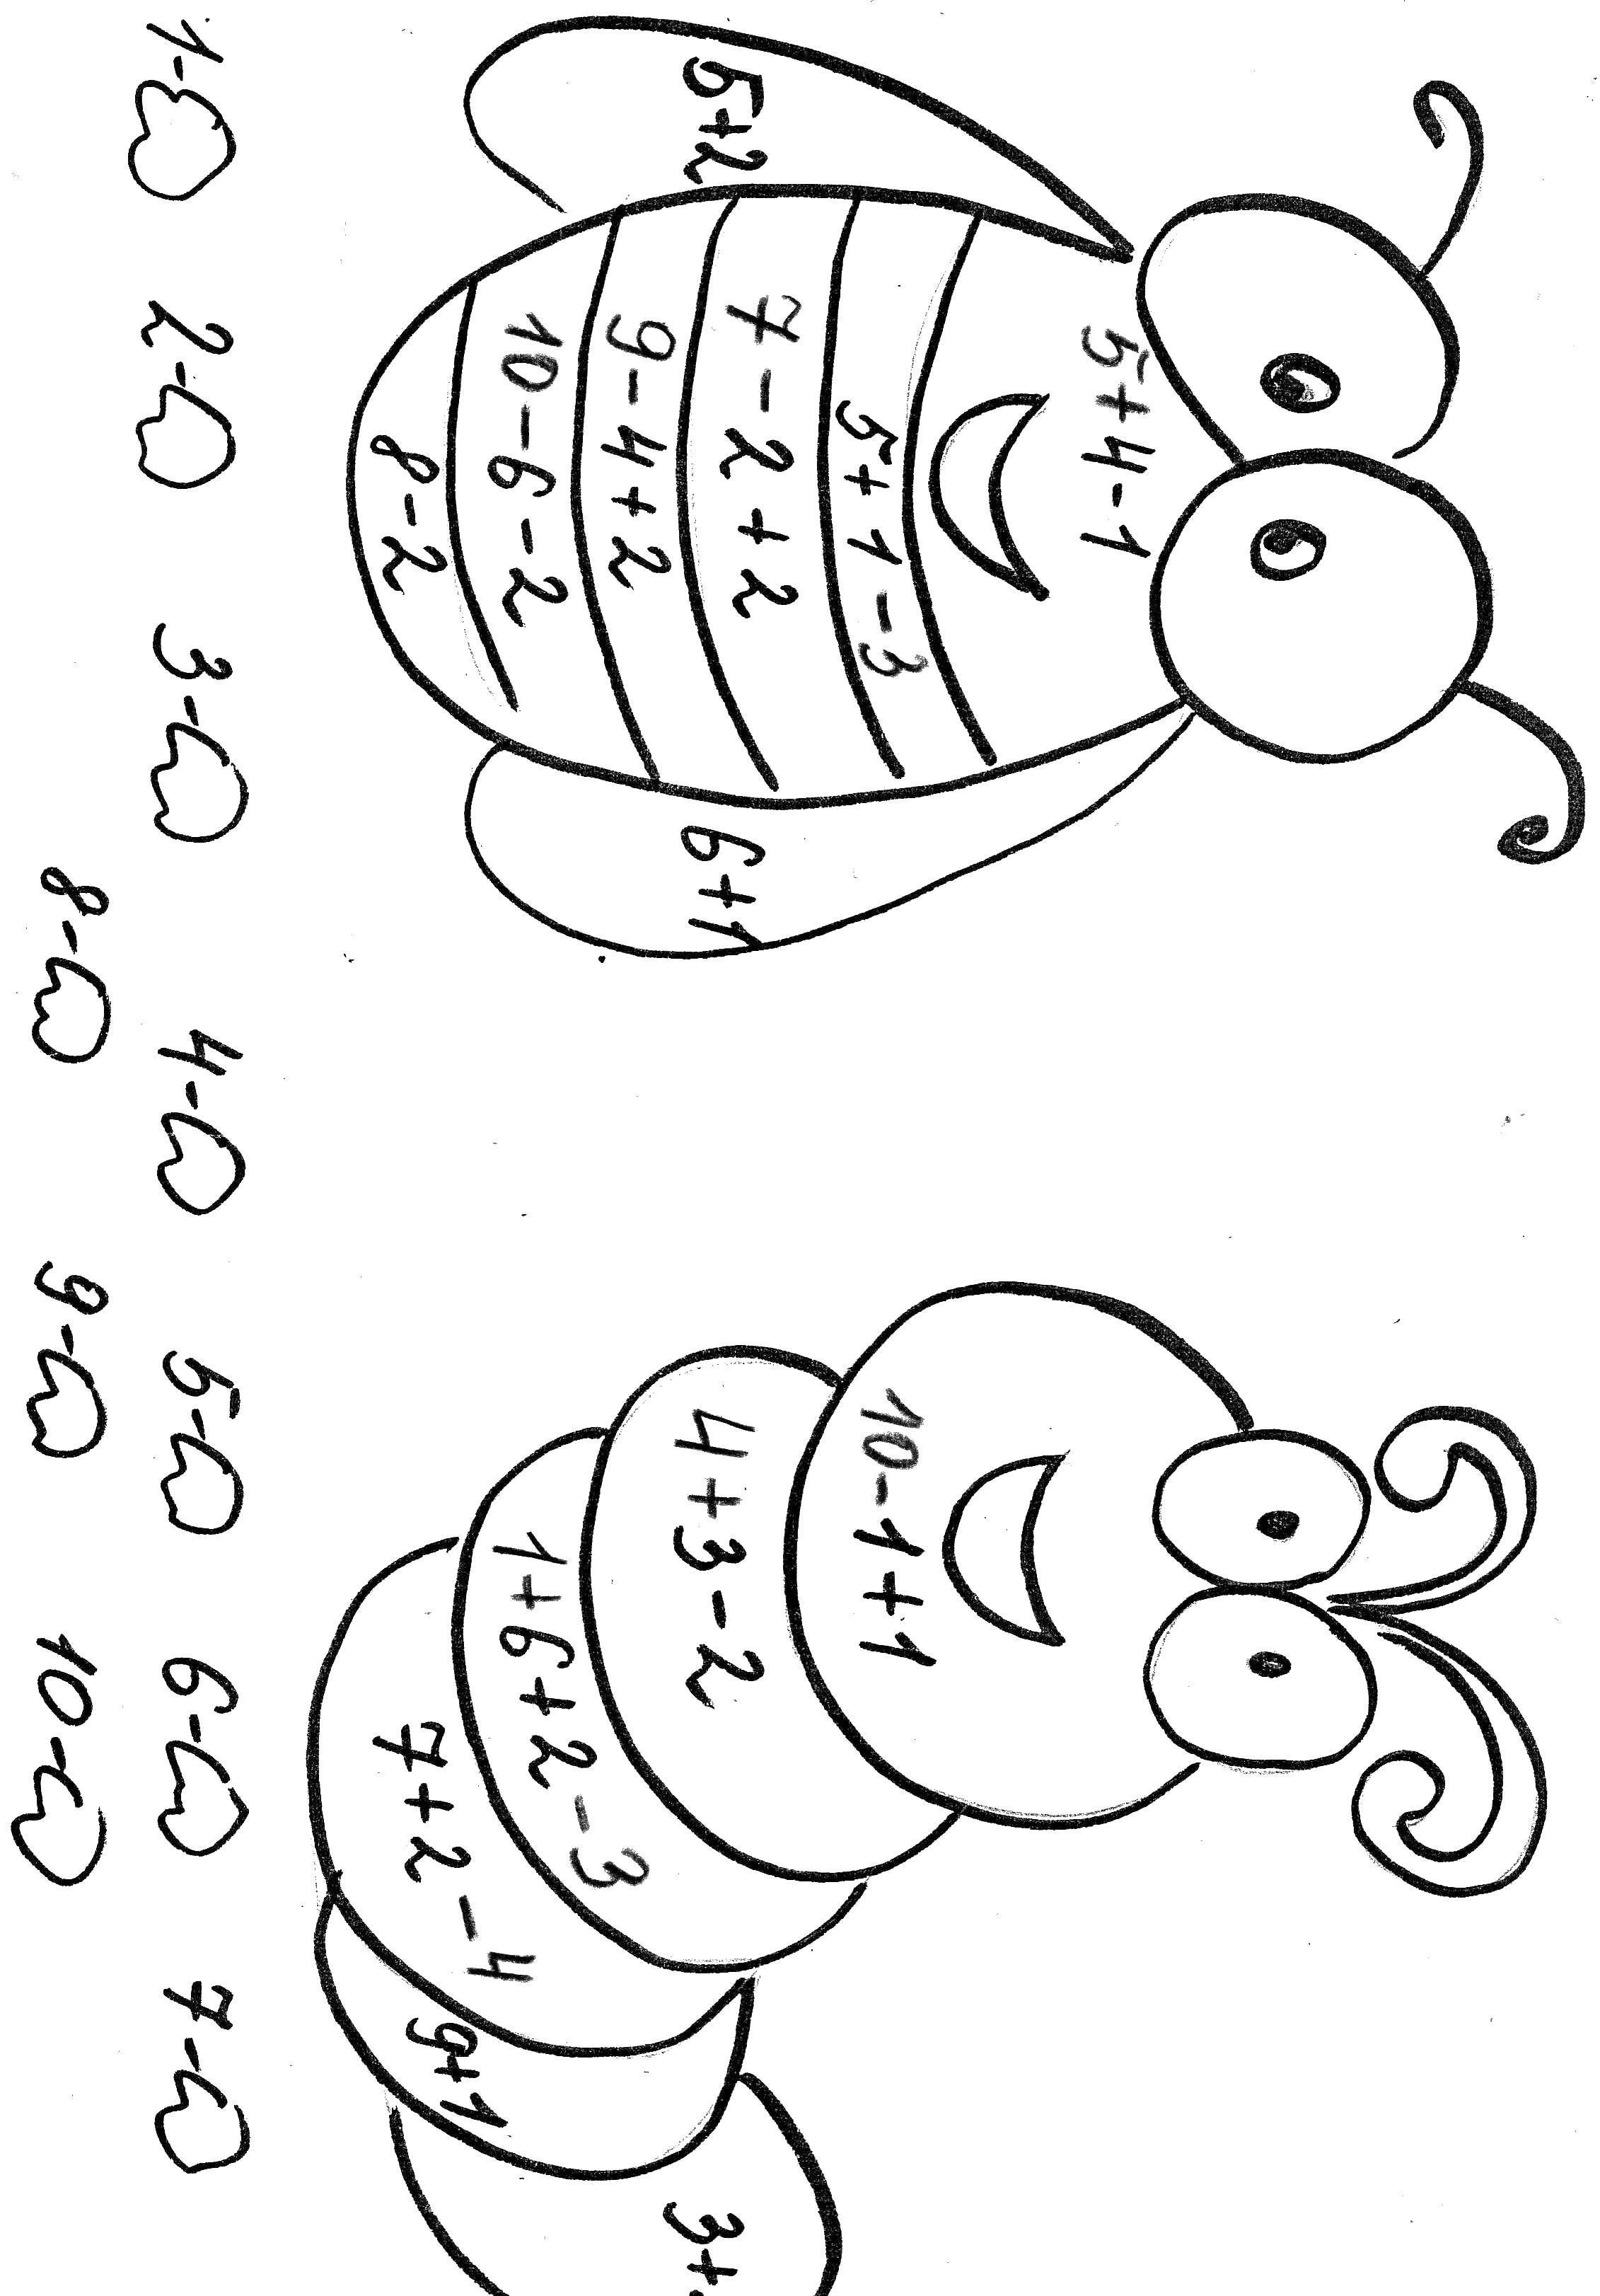 Coloring Insects. Category mathematical coloring pages. Tags:  mathematics, mystery.